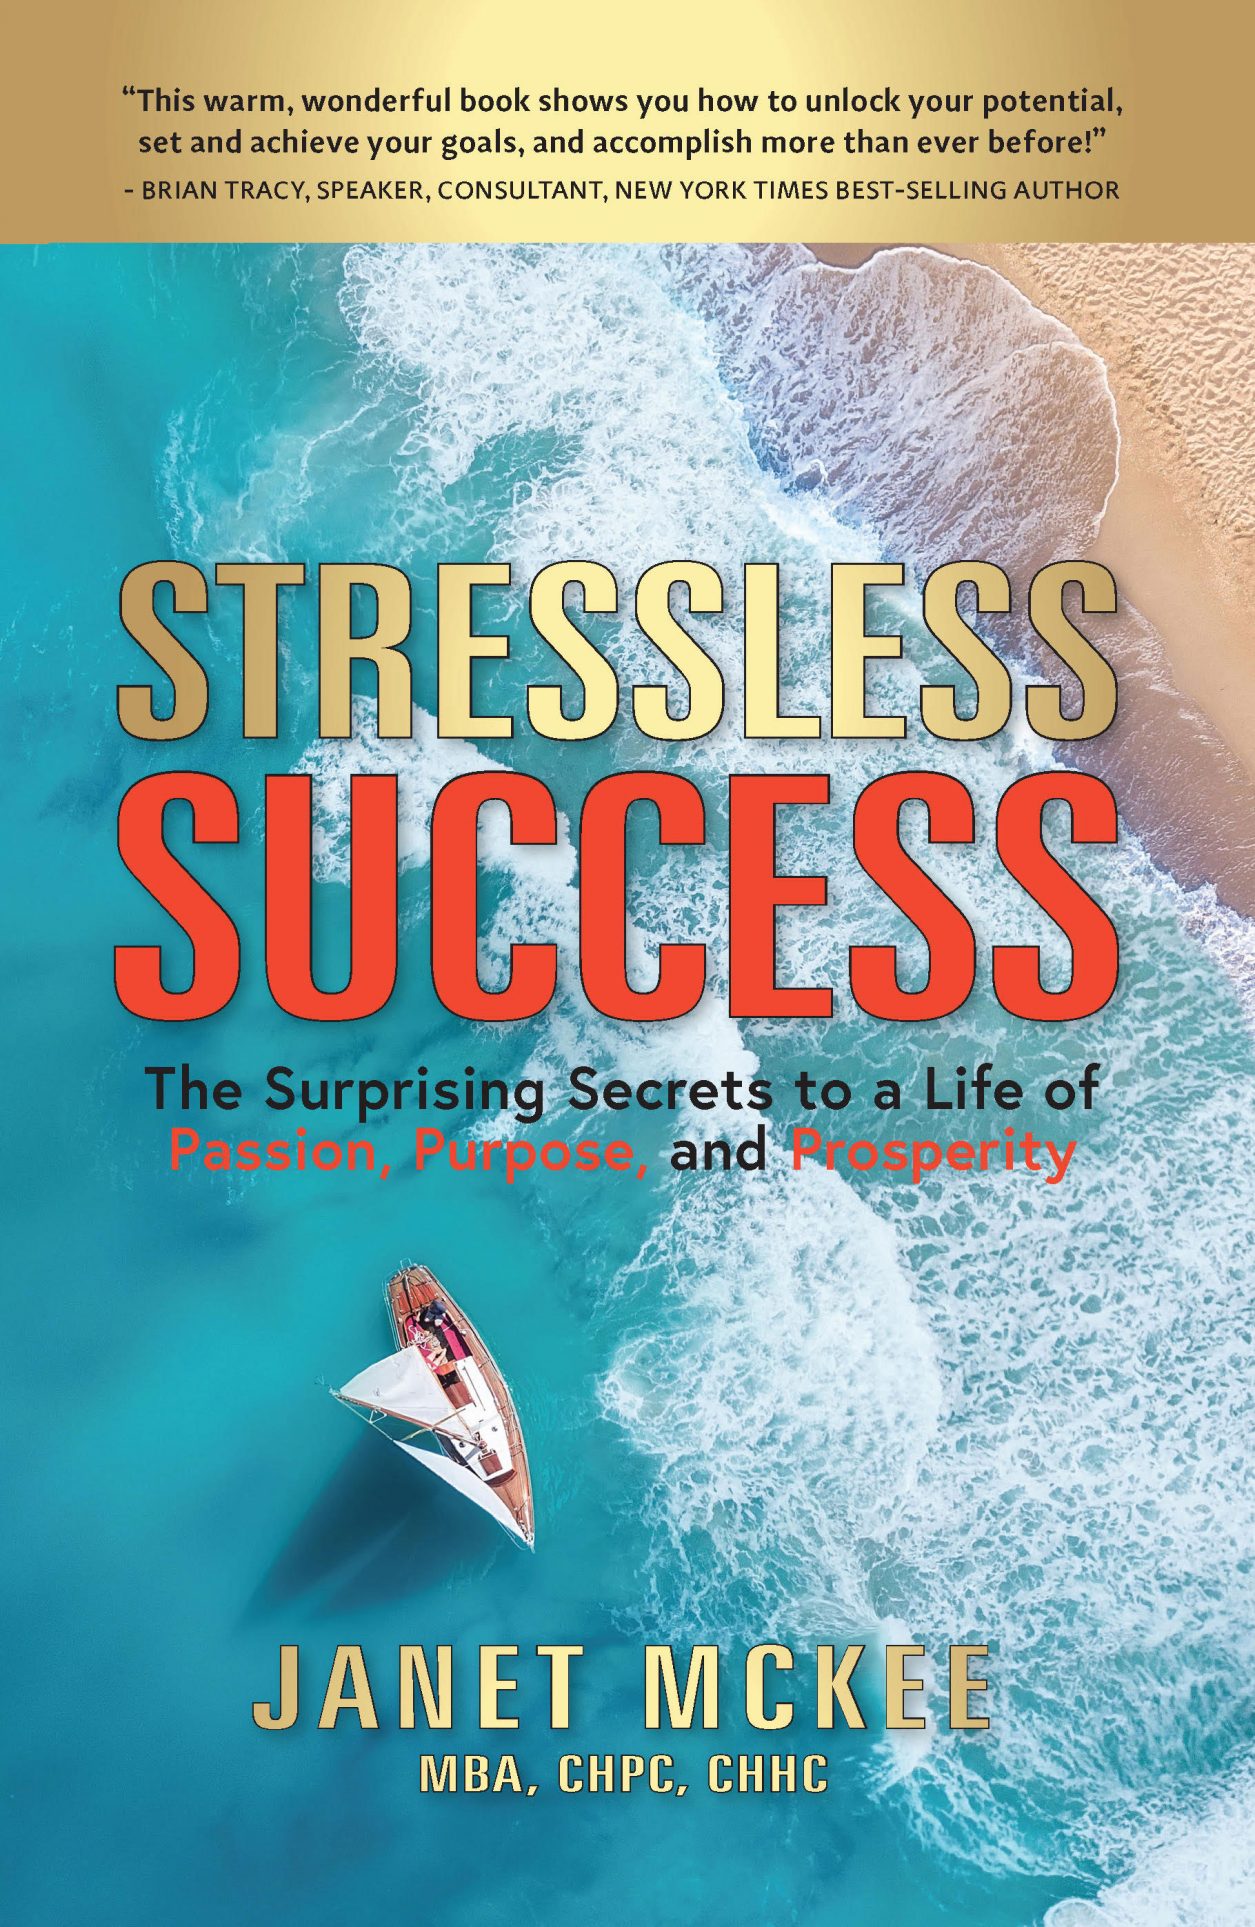 Stressless Success by Janet McKee